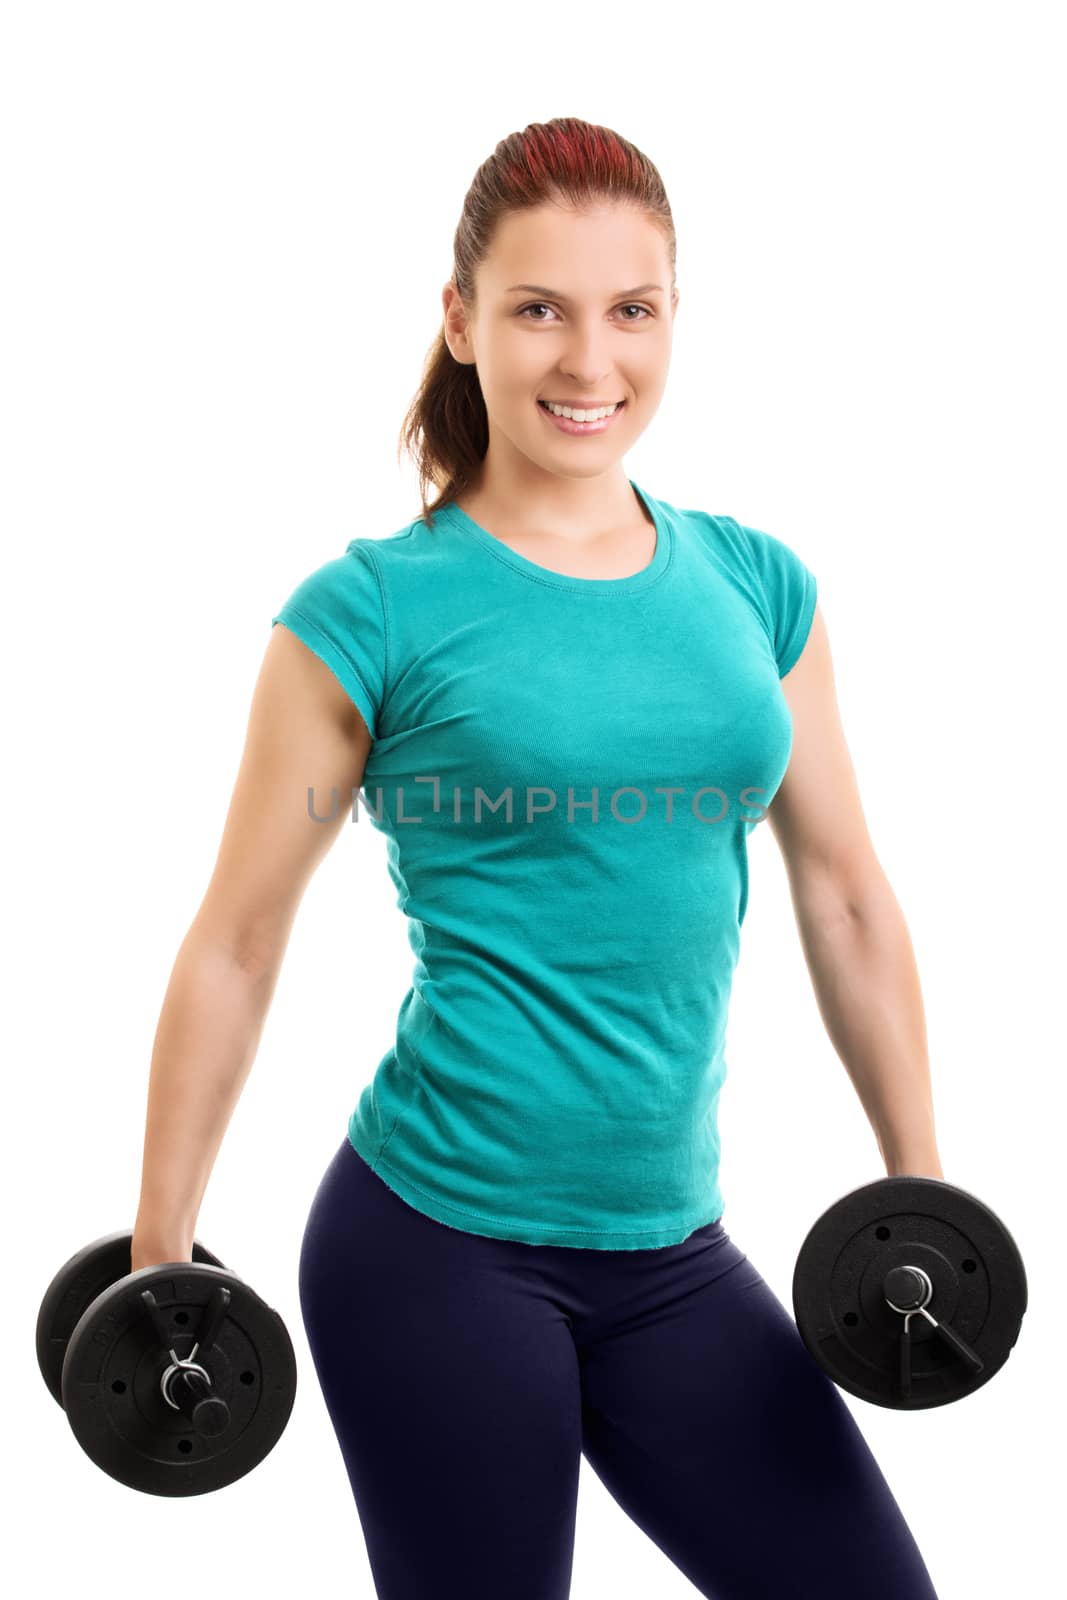 Young athlete holding dumbbells by Mendelex